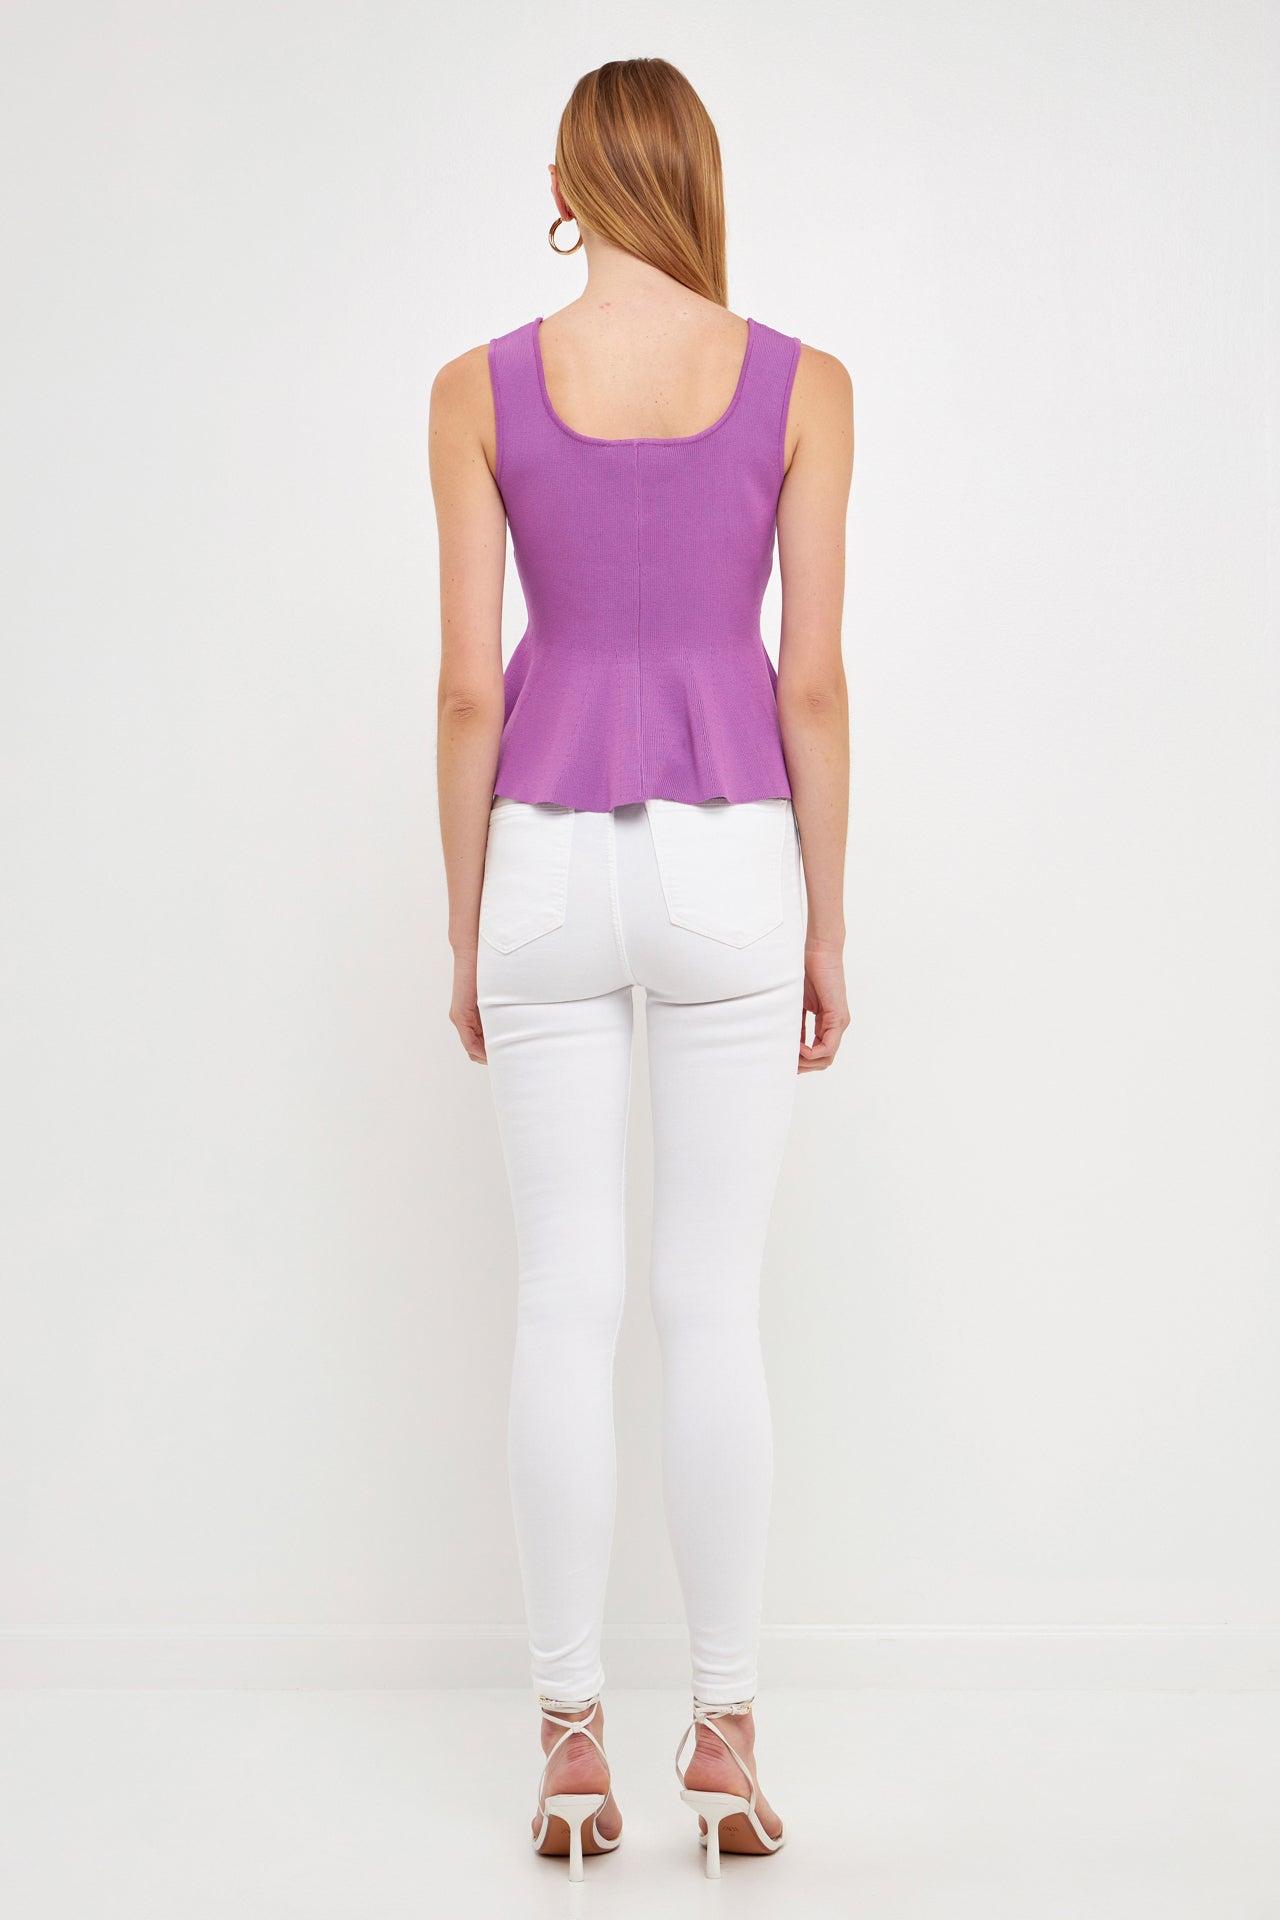 ENDLESS ROSE - Flare Detail Knit Tank Top - TOPS available at Objectrare